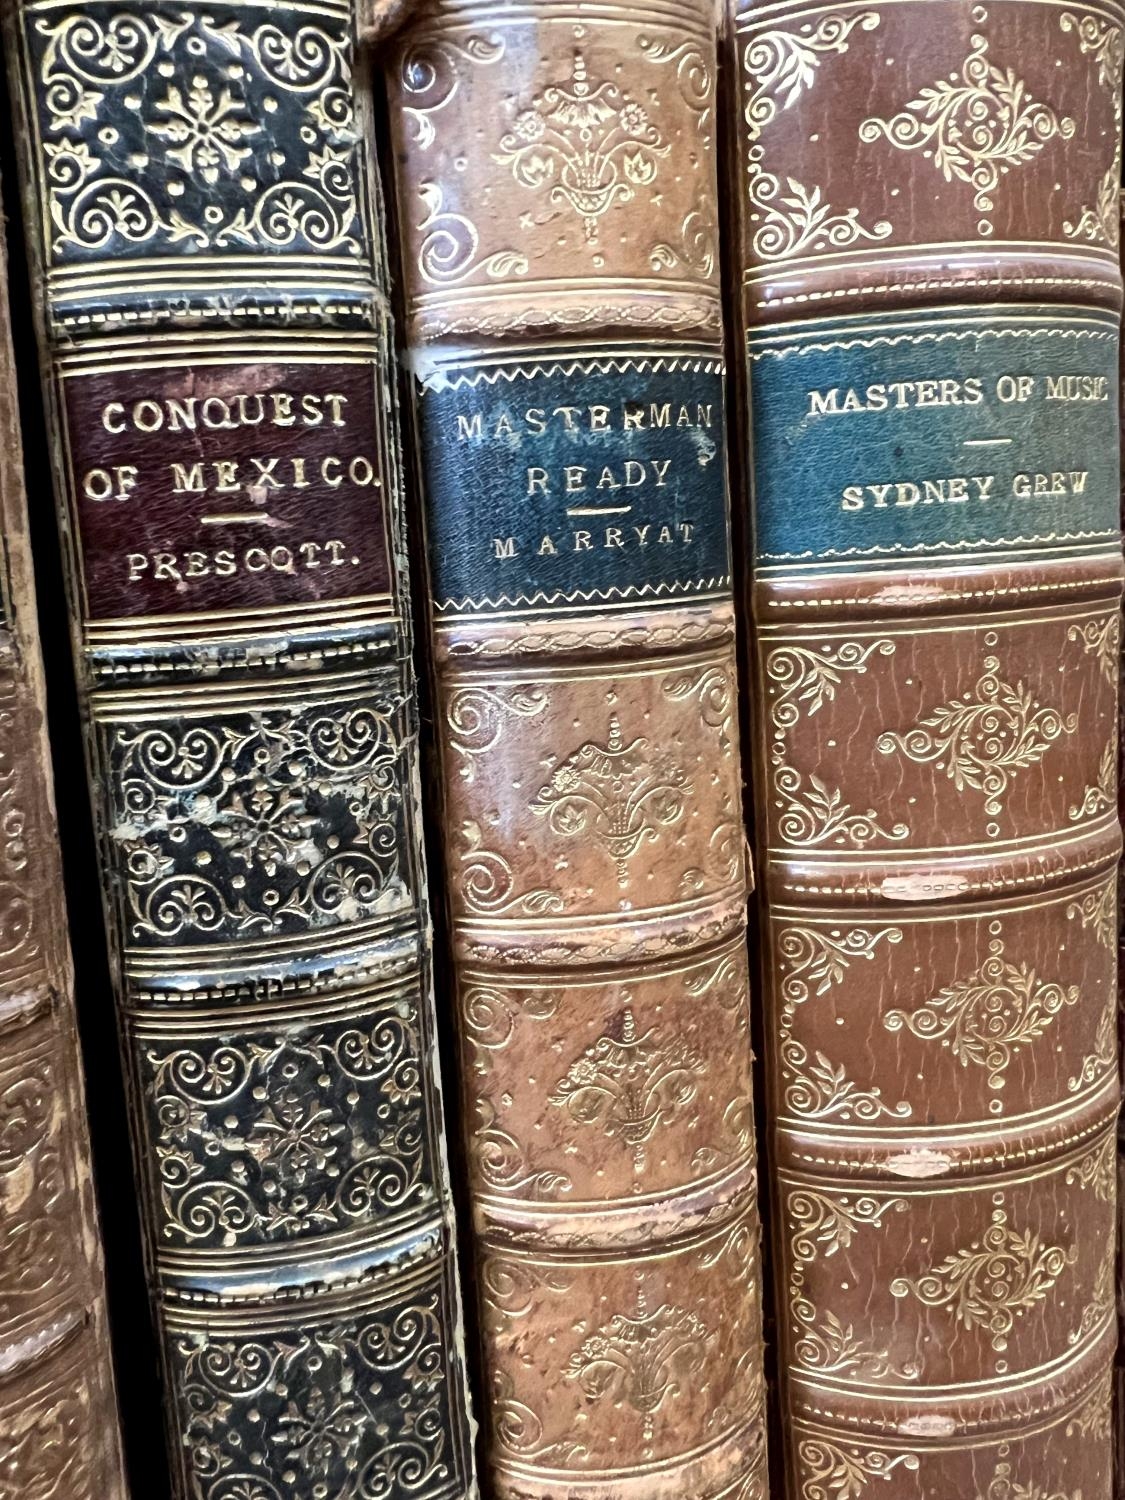 Antiquarian bindings including The Conquest of Mexico, Master Man Ready, Masters of Music, etc (14 - Image 2 of 3